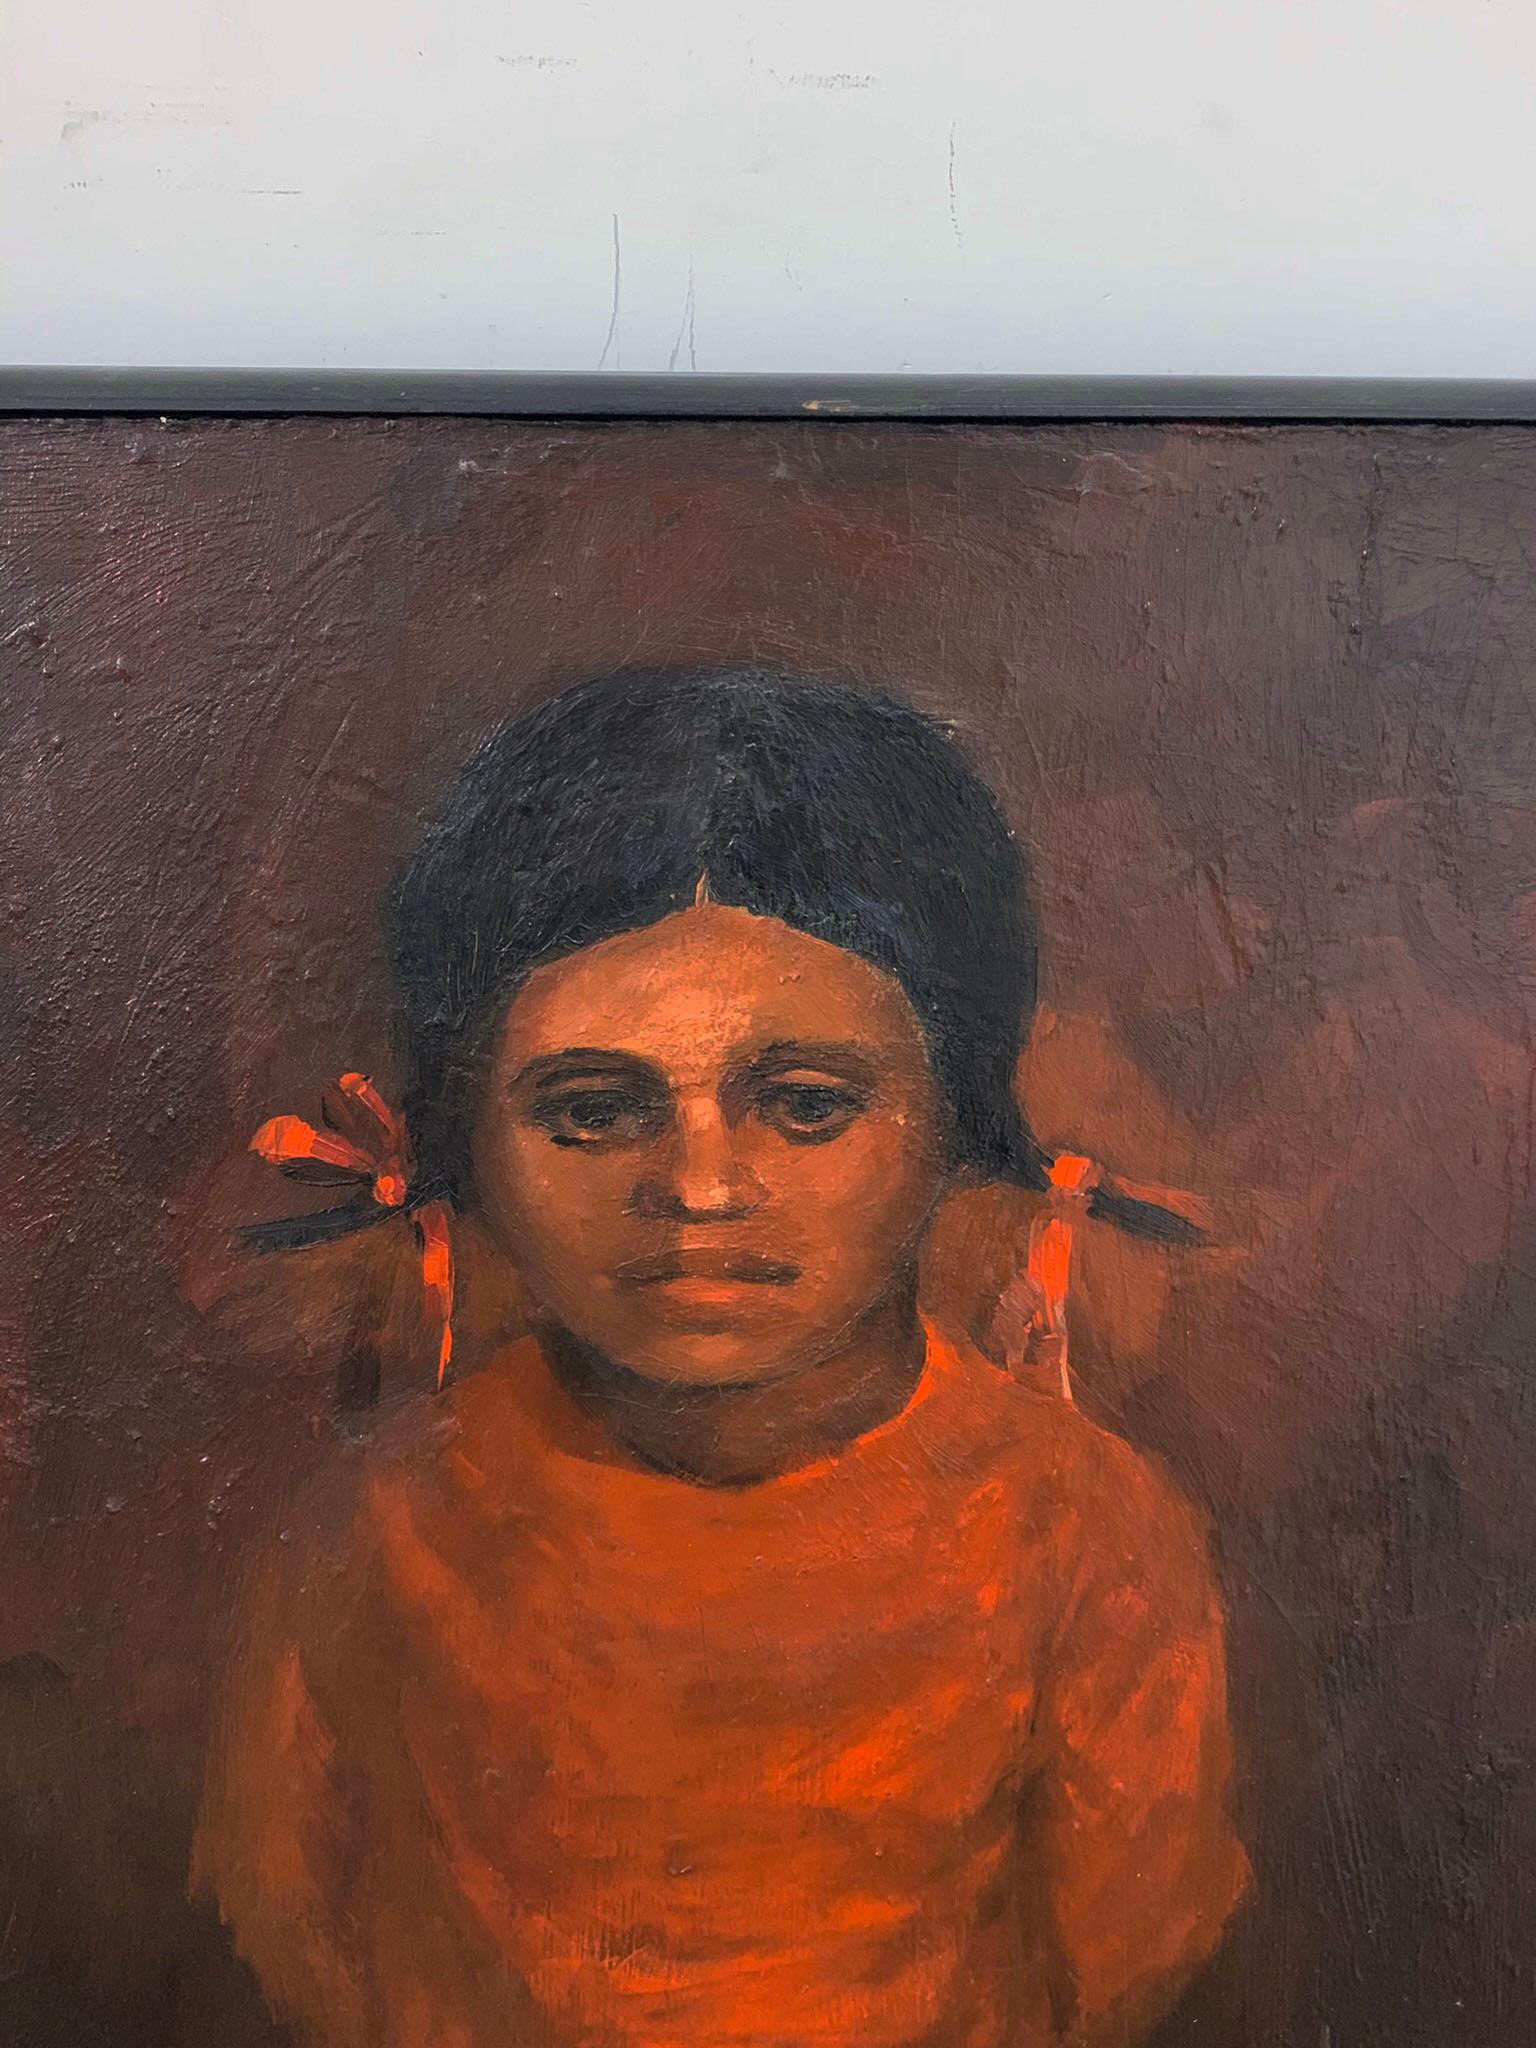 Civil rights era painting of a young girl signed Barbara Chandler, dated 1966 and titled “homo homini lupus”, a saying that refers to the concept that mankind is cruel and inhuman unto others.